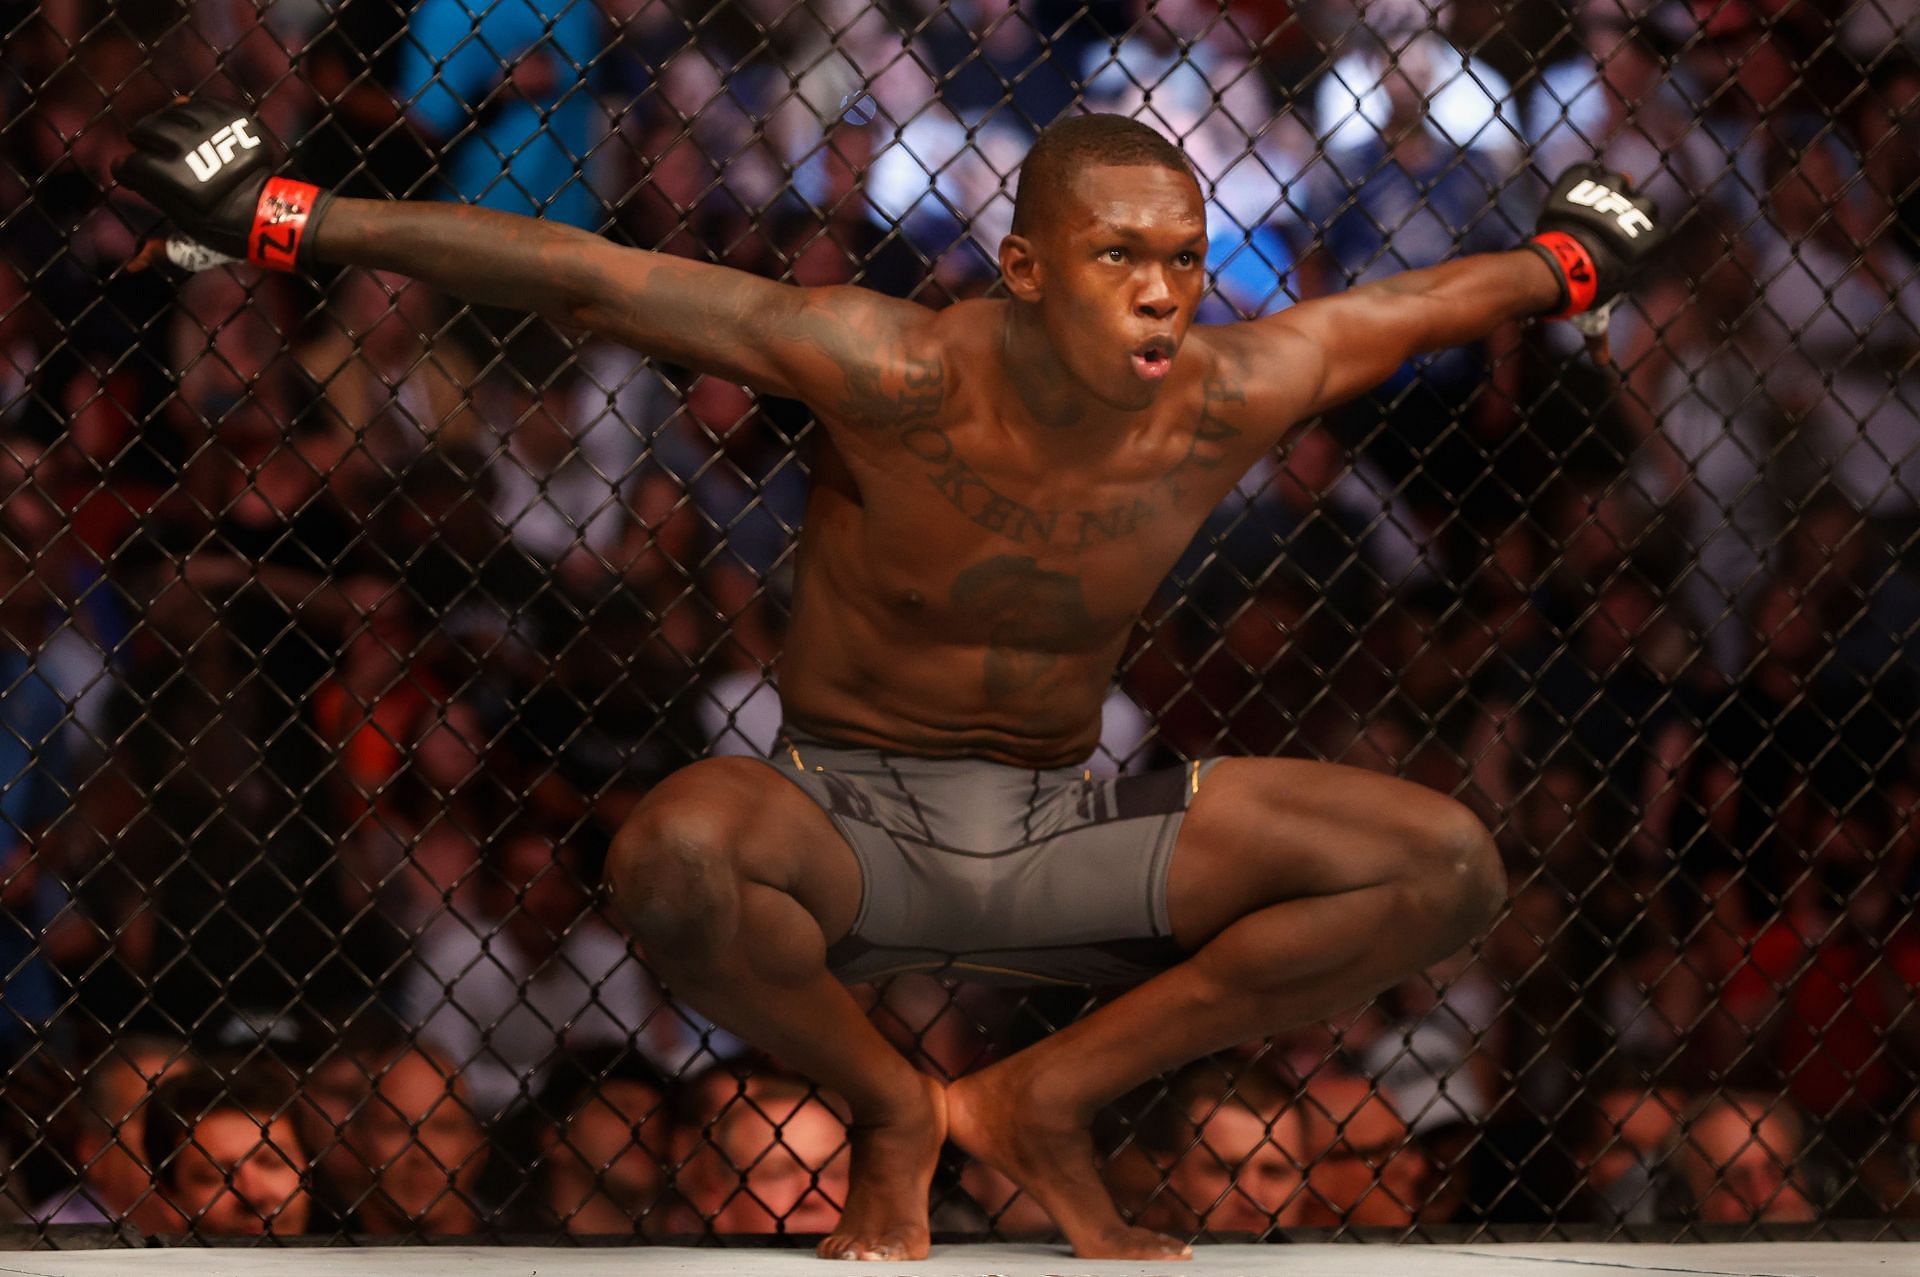 Israel Adesanya is probably the best counter-striker in the UFC today